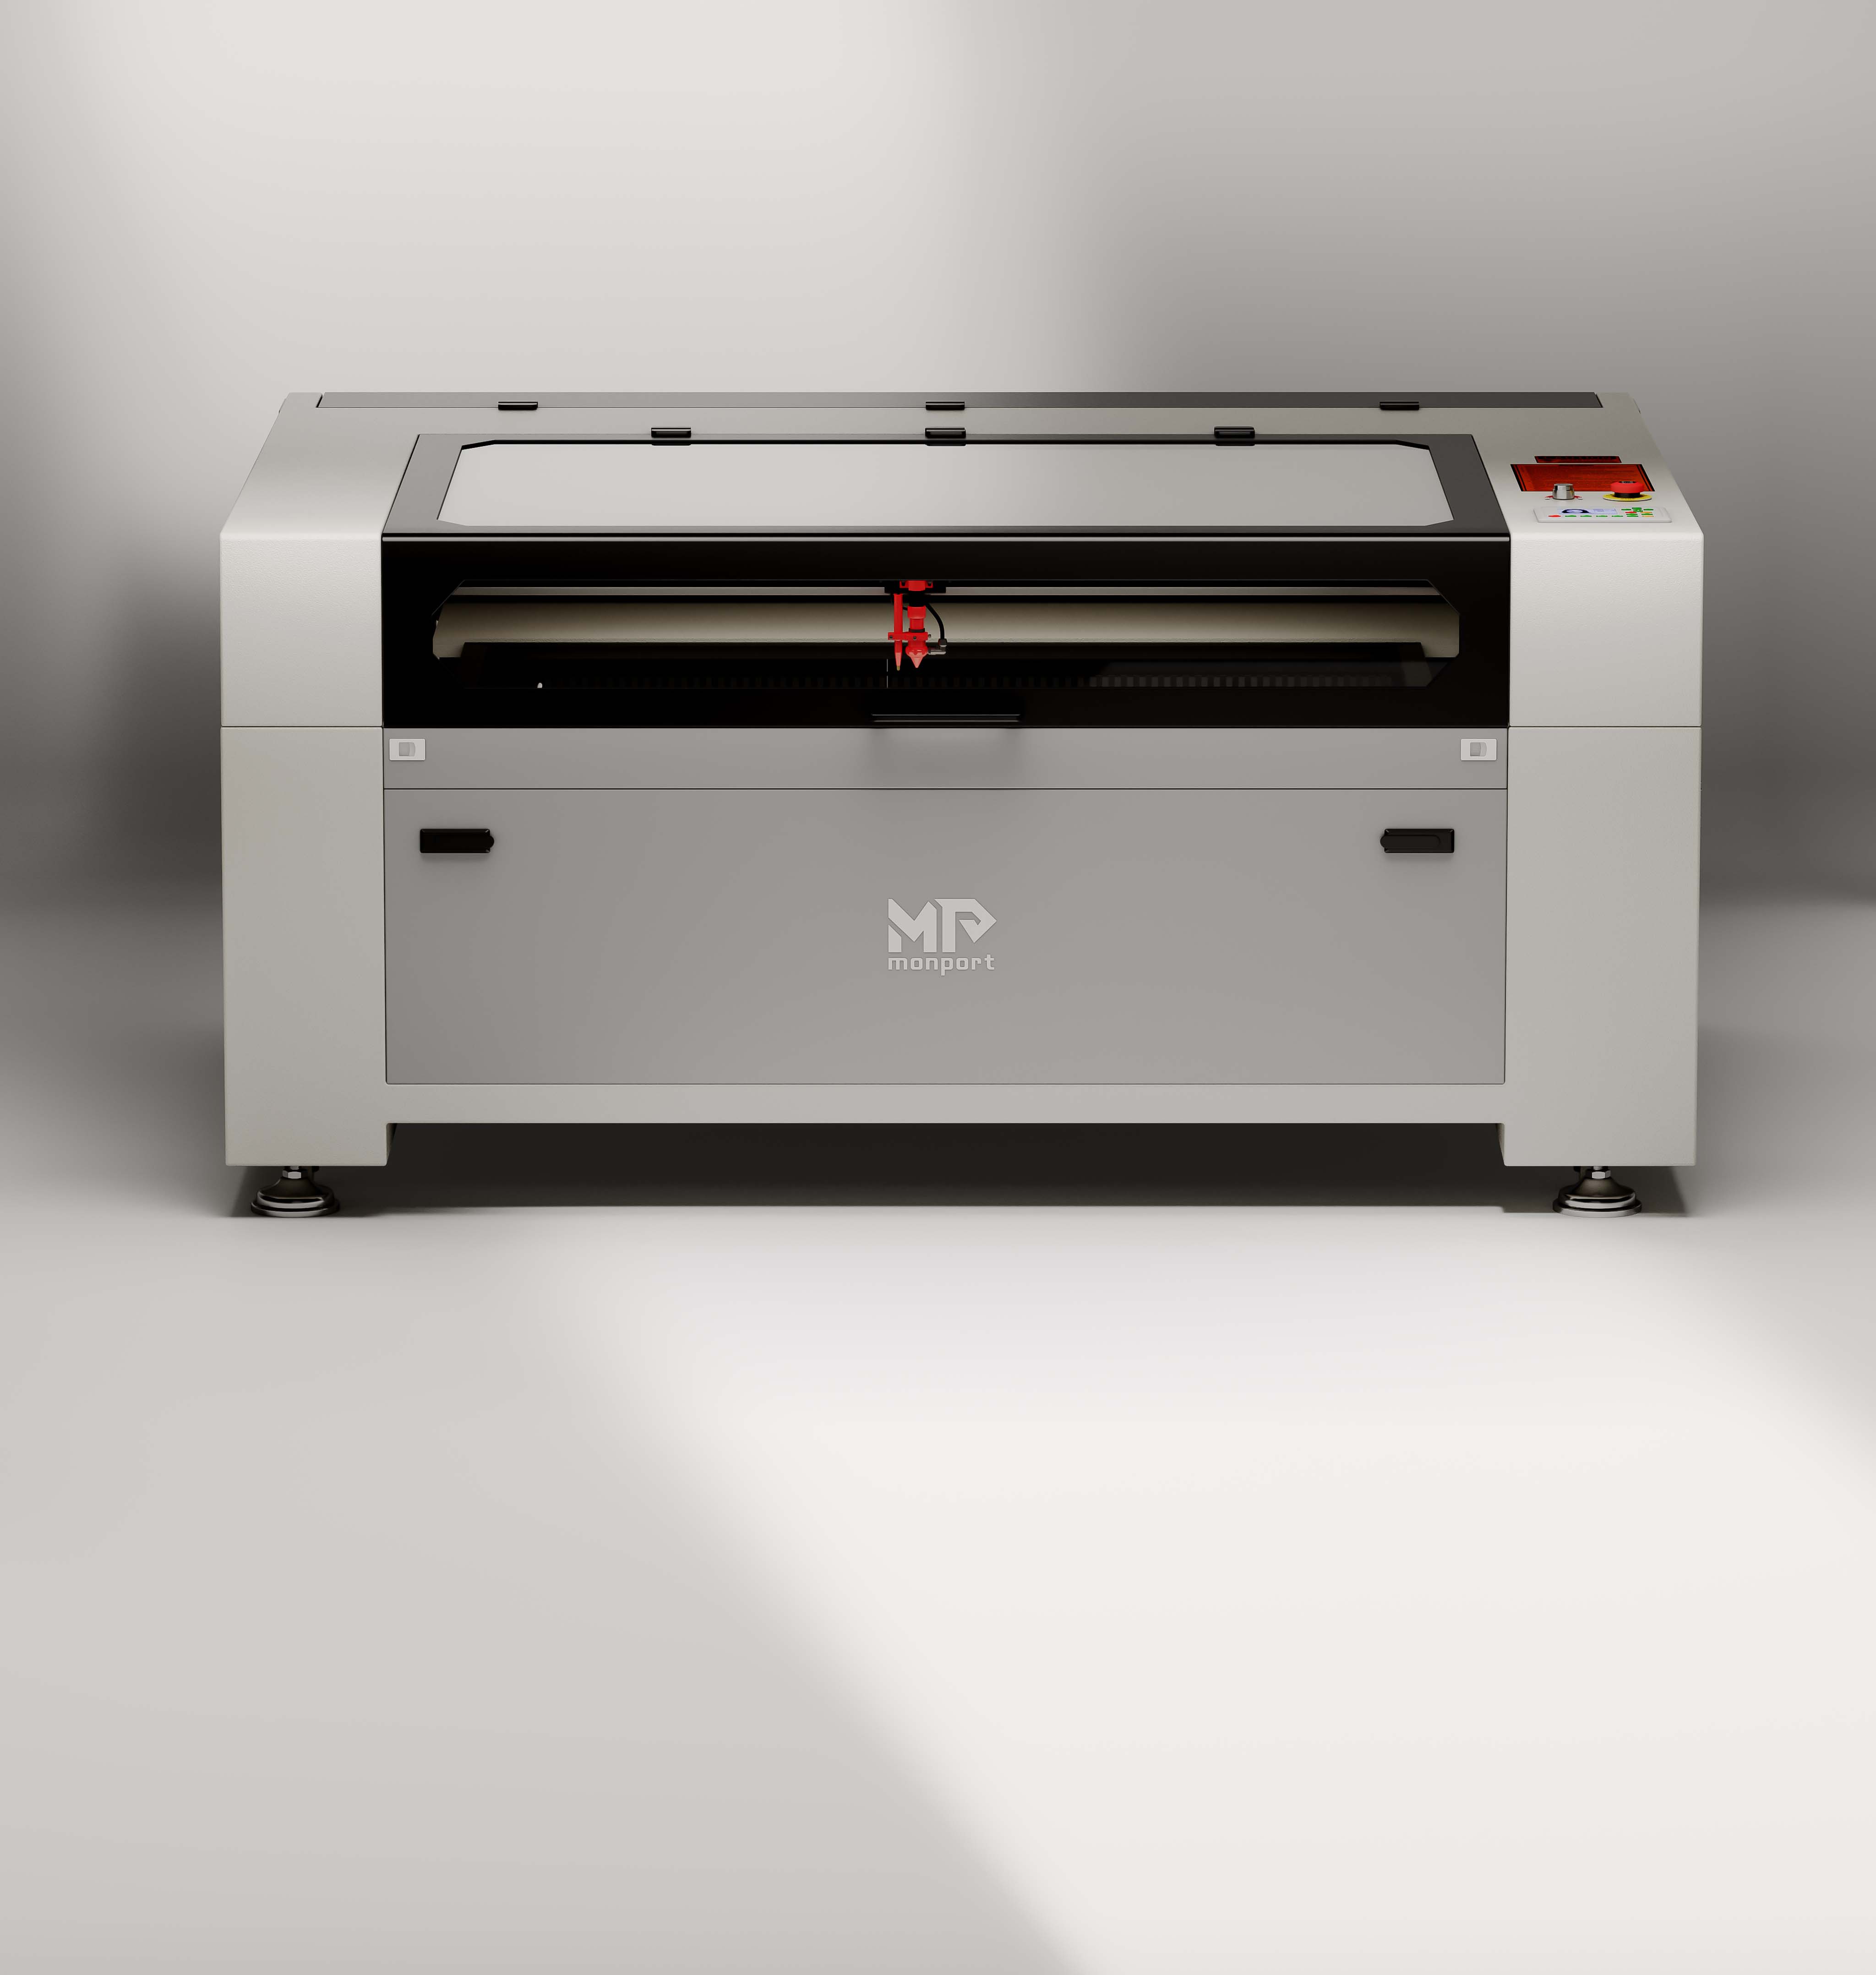 2023 Best CO2 Laser Cutter for Small Business and Home Use - STYLECNC